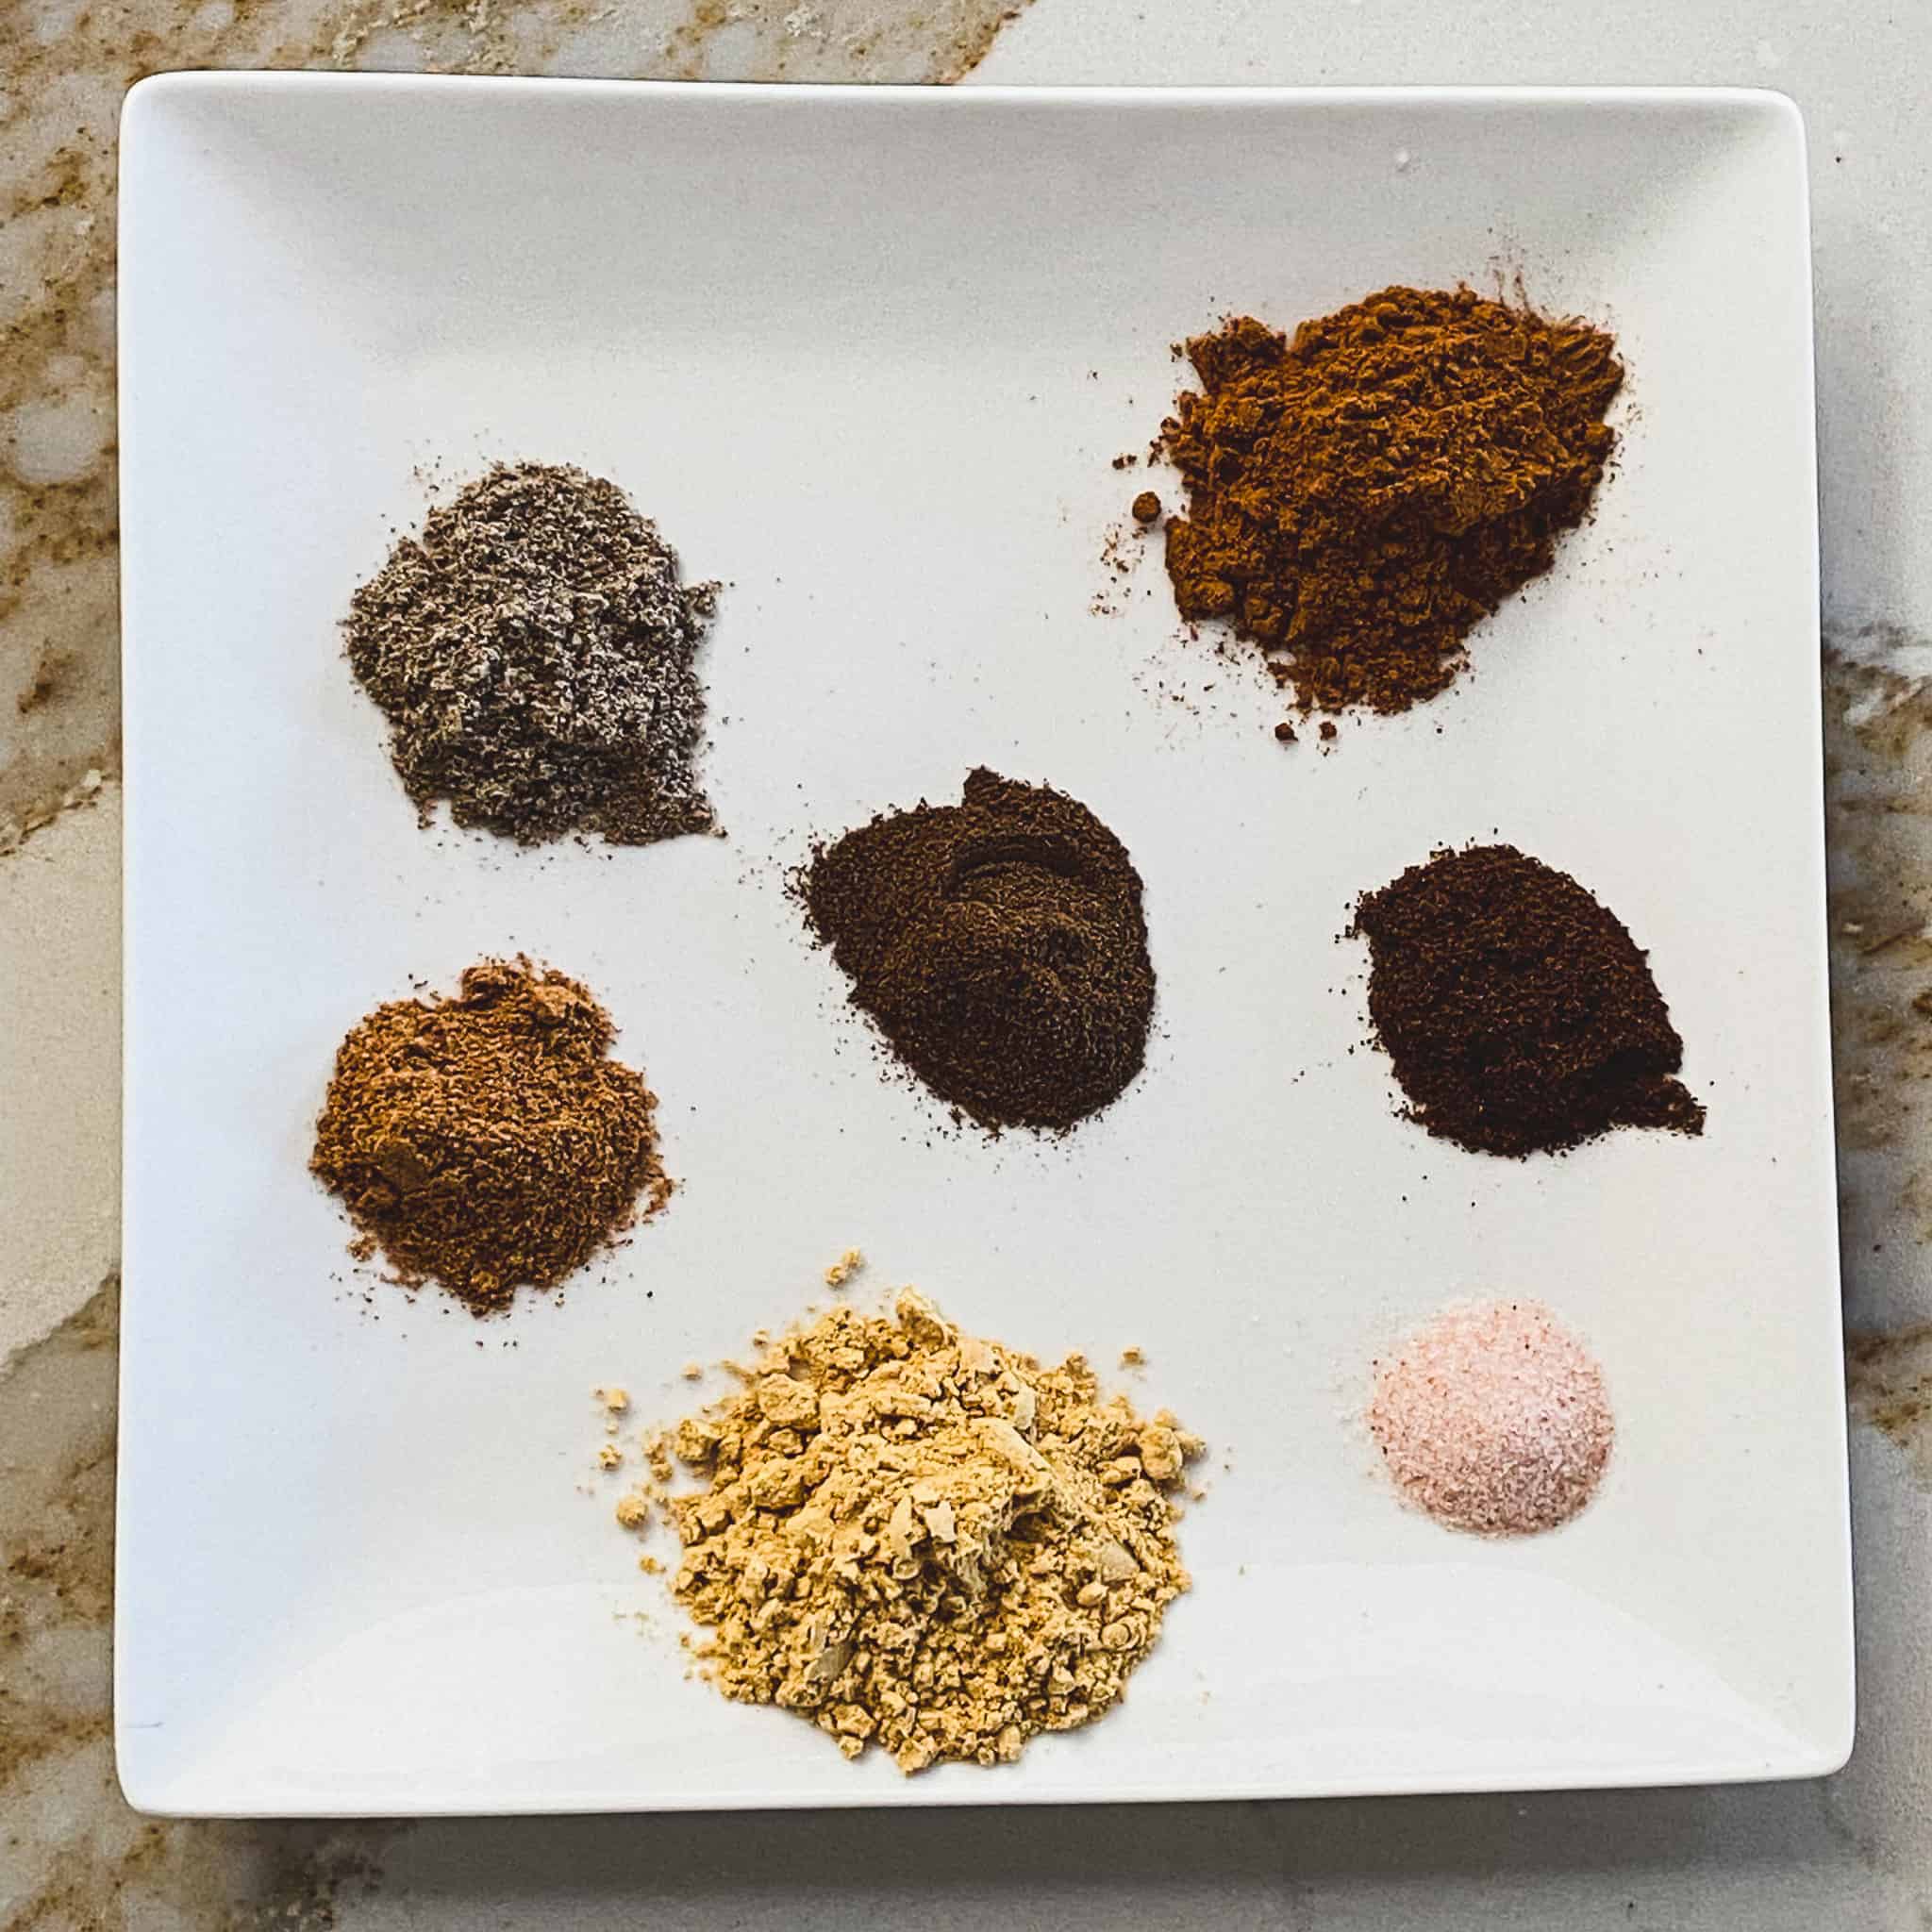 Chai spices displayed on a plate.